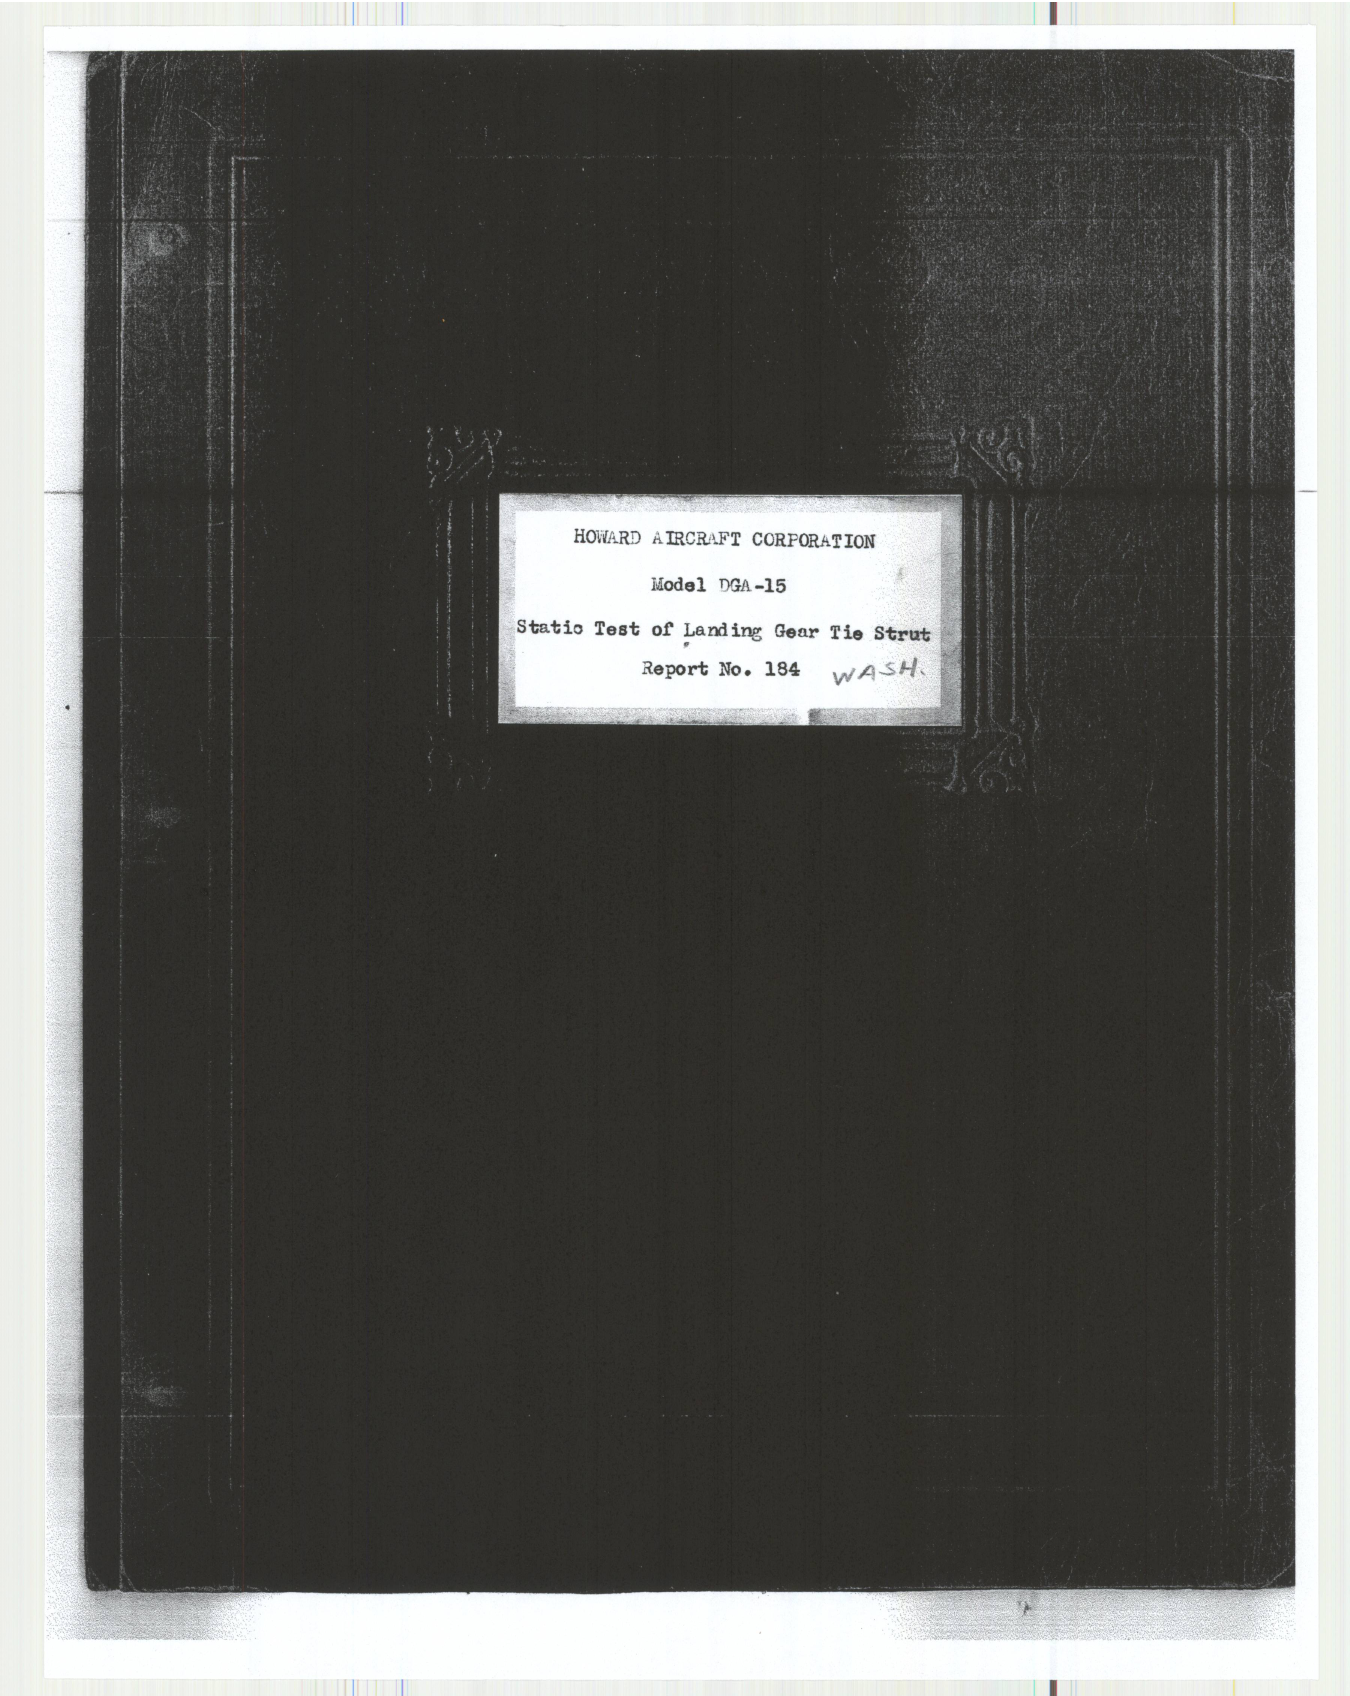 Sample page 1 from AirCorps Library document: Report 184, Static Test of Landing Gear Tie Strut, DGA-15